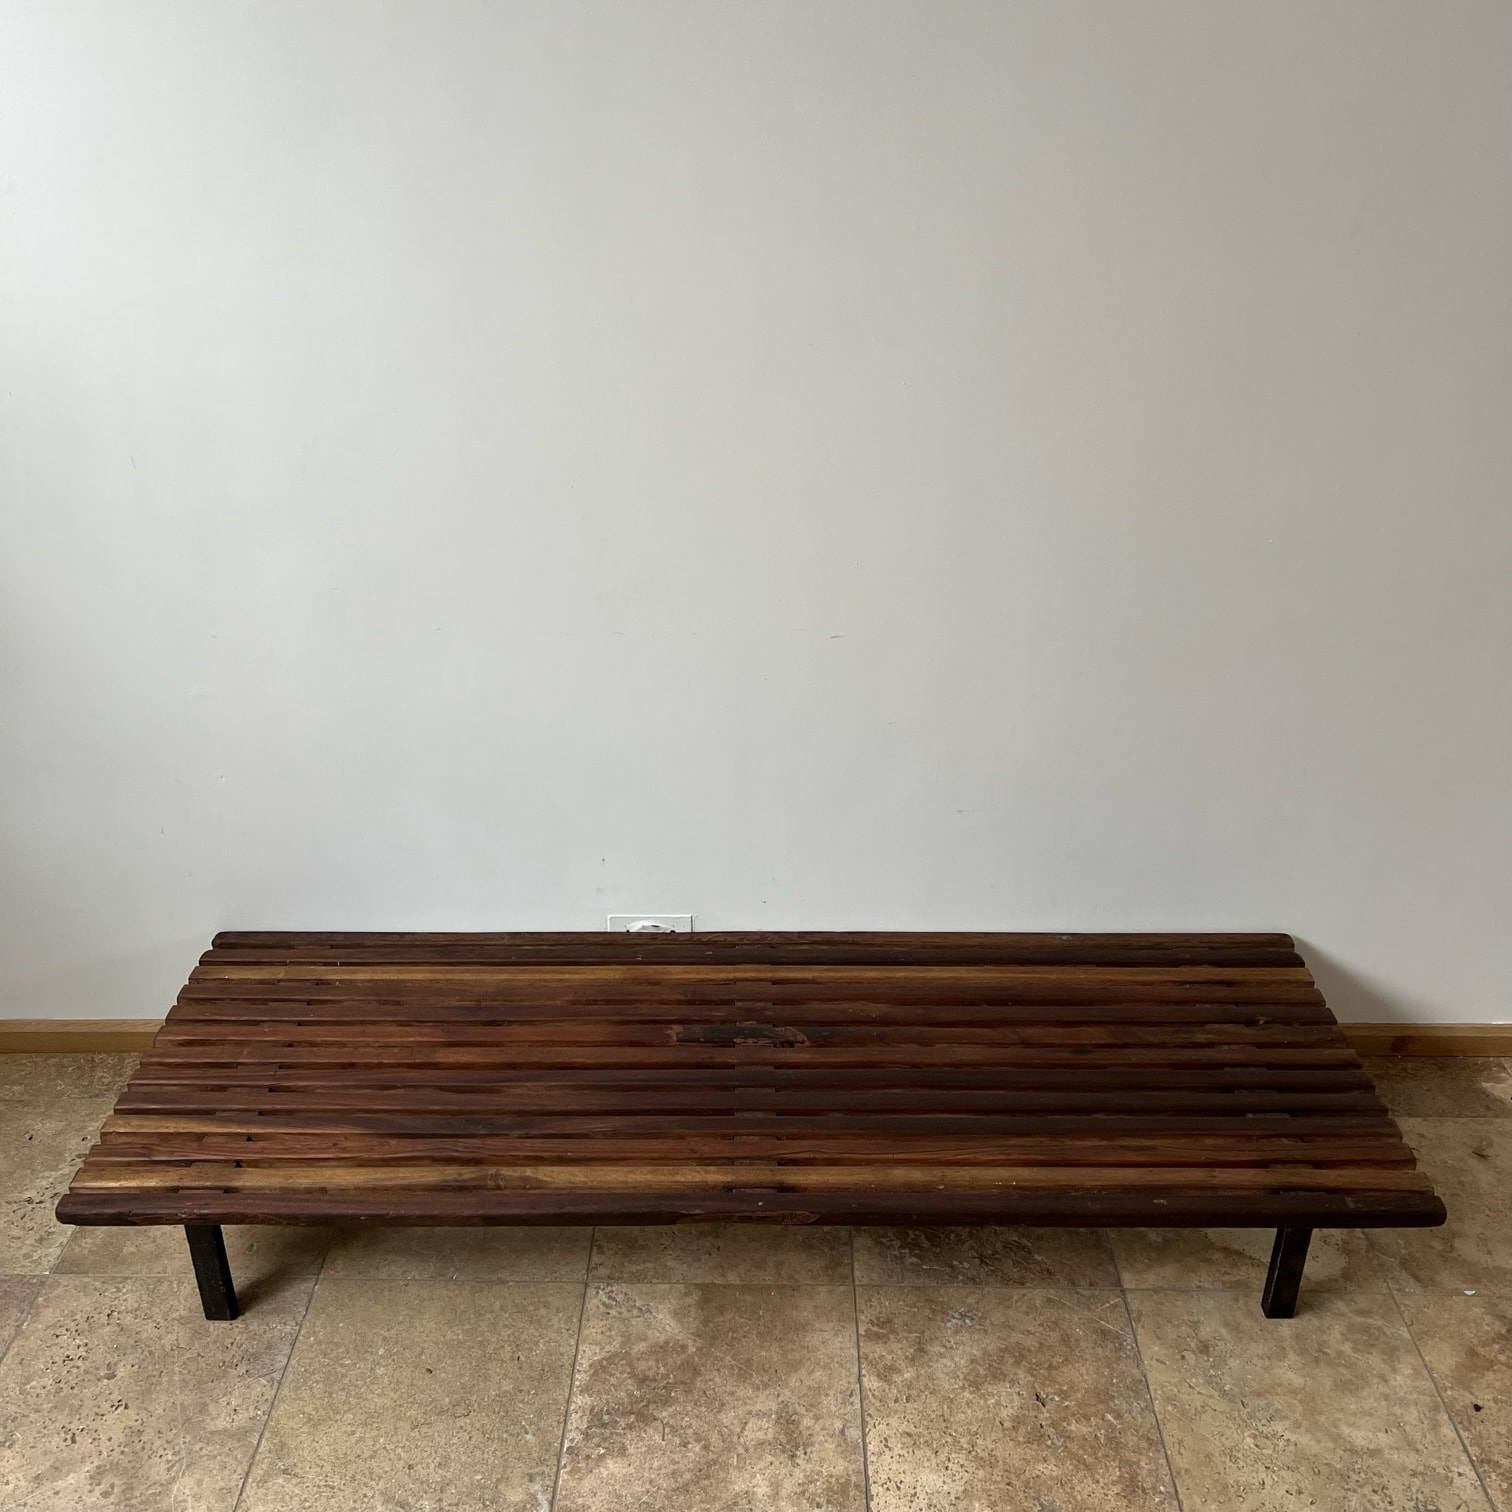 Sold at Auction: Charlotte Perriand, Charlotte Perriand, Steph Simon, Bench  of Cité Cansado